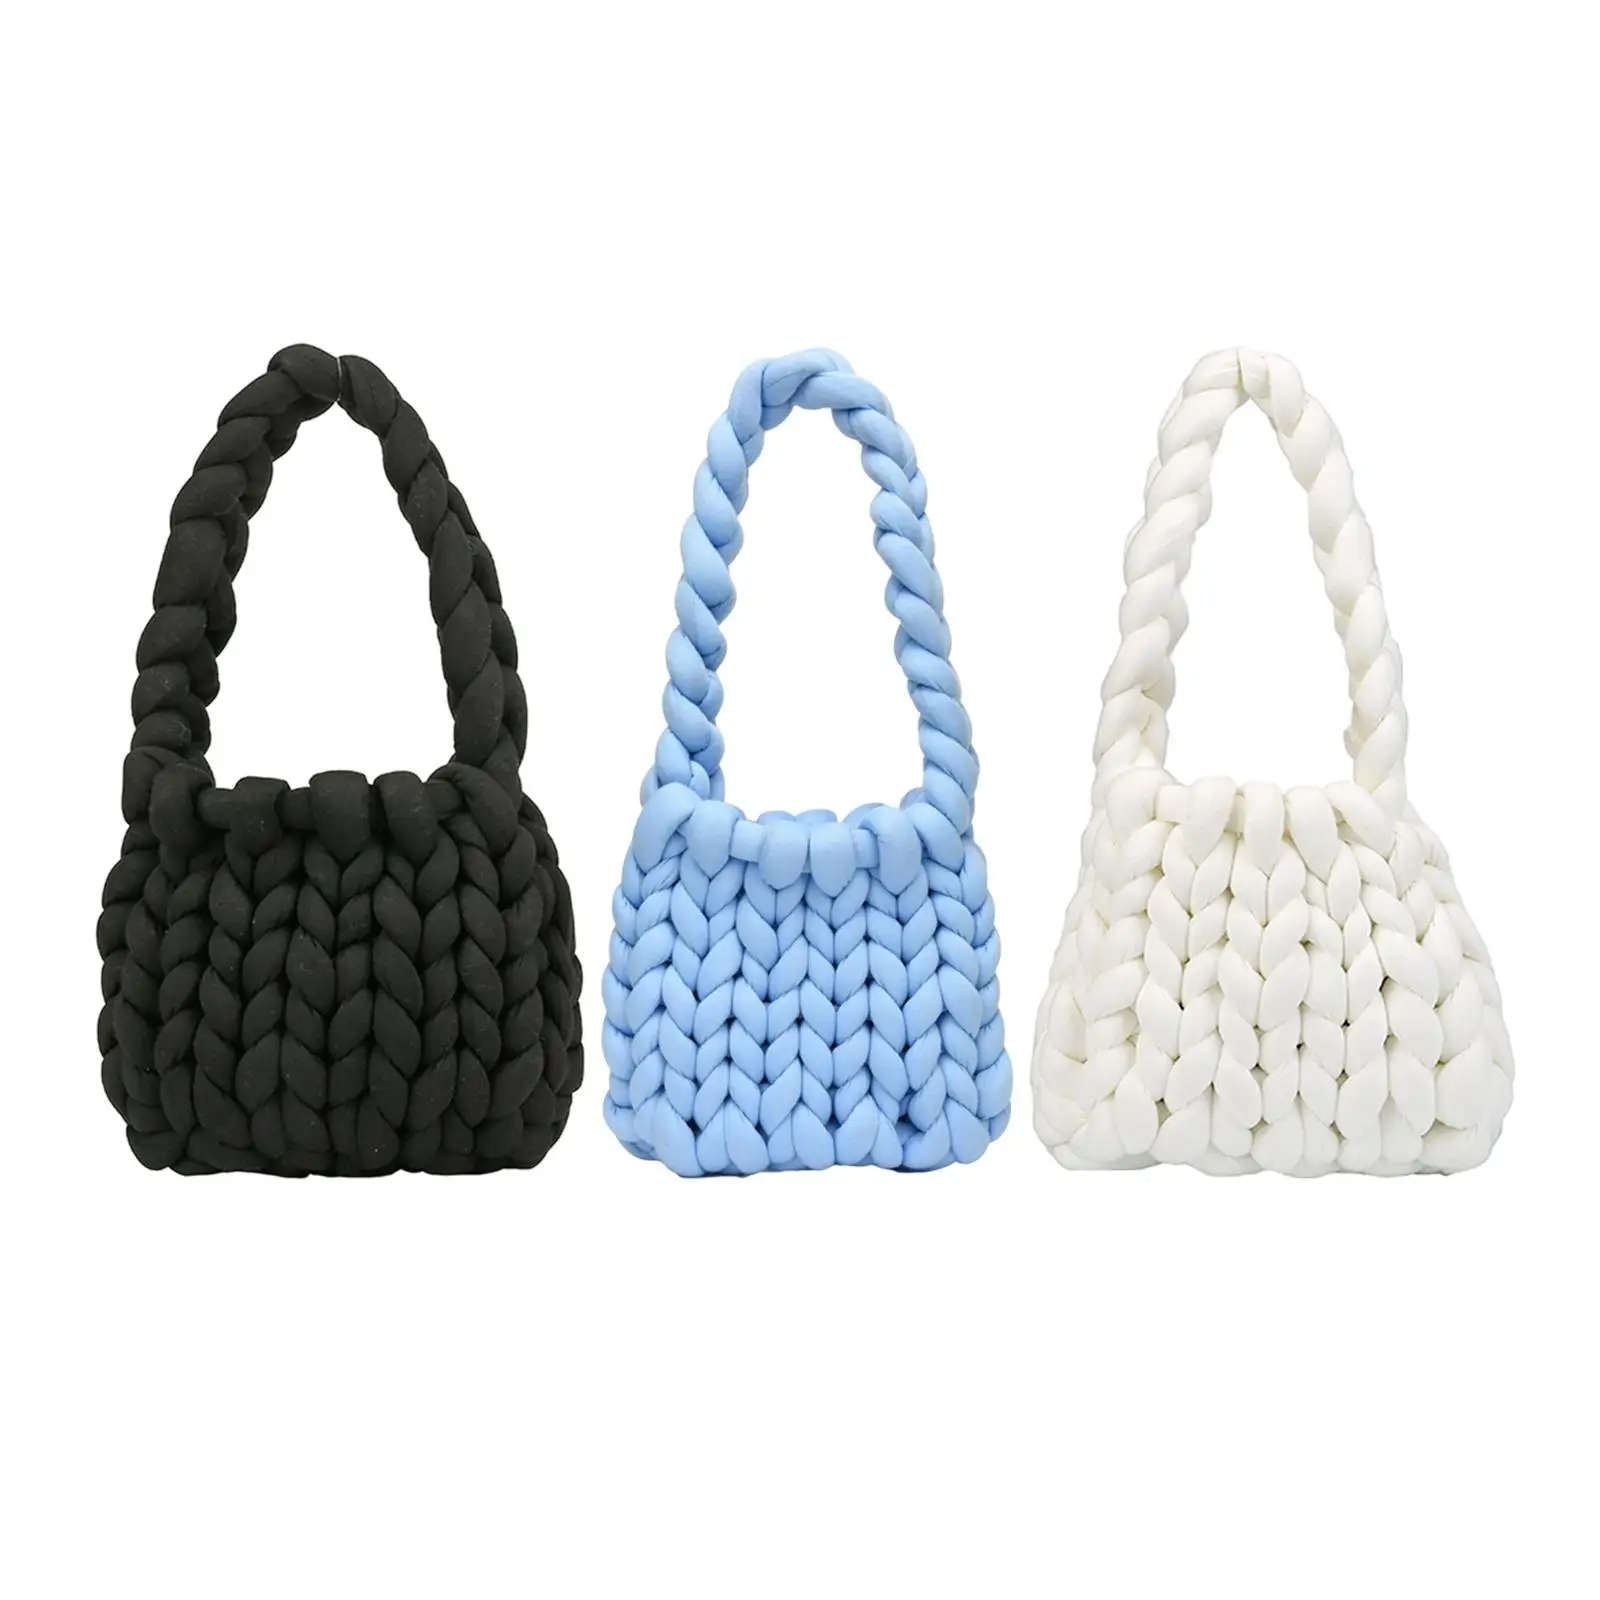 Chunky Yarn Small Tote Bag Breathable Soft Hand Knitting for Home Decor